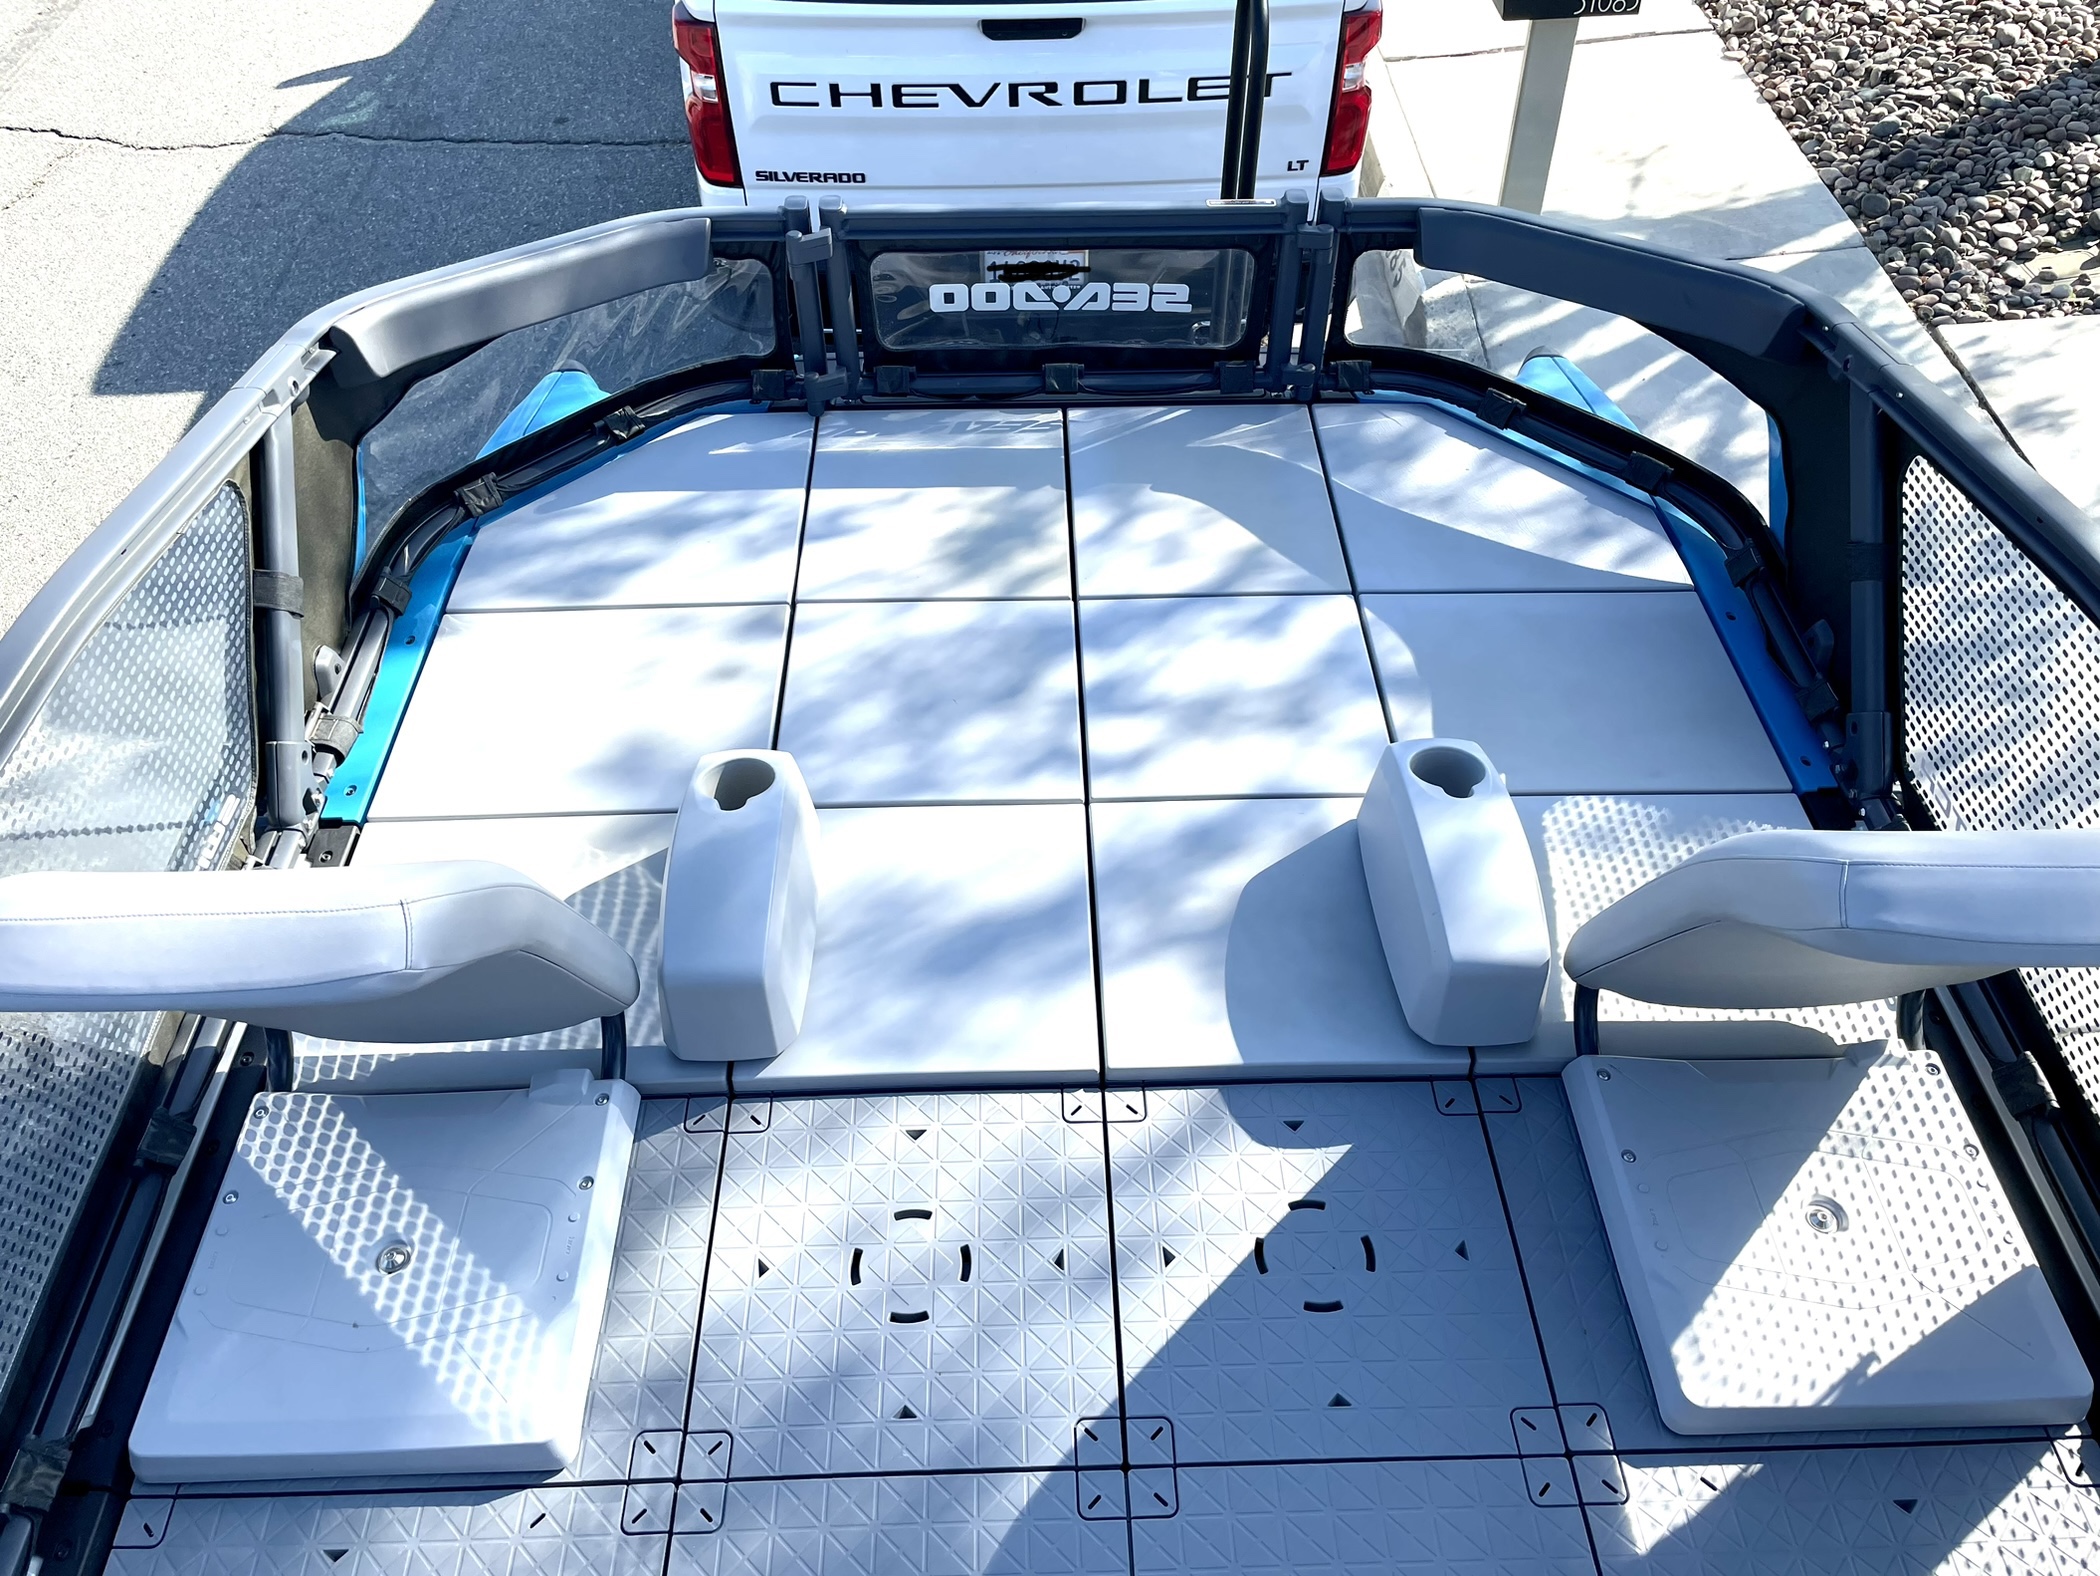 2022 21 foot SeaDoo Switch Sport Pontoon Boat for sale in Cathedral Cty, CA - image 10 